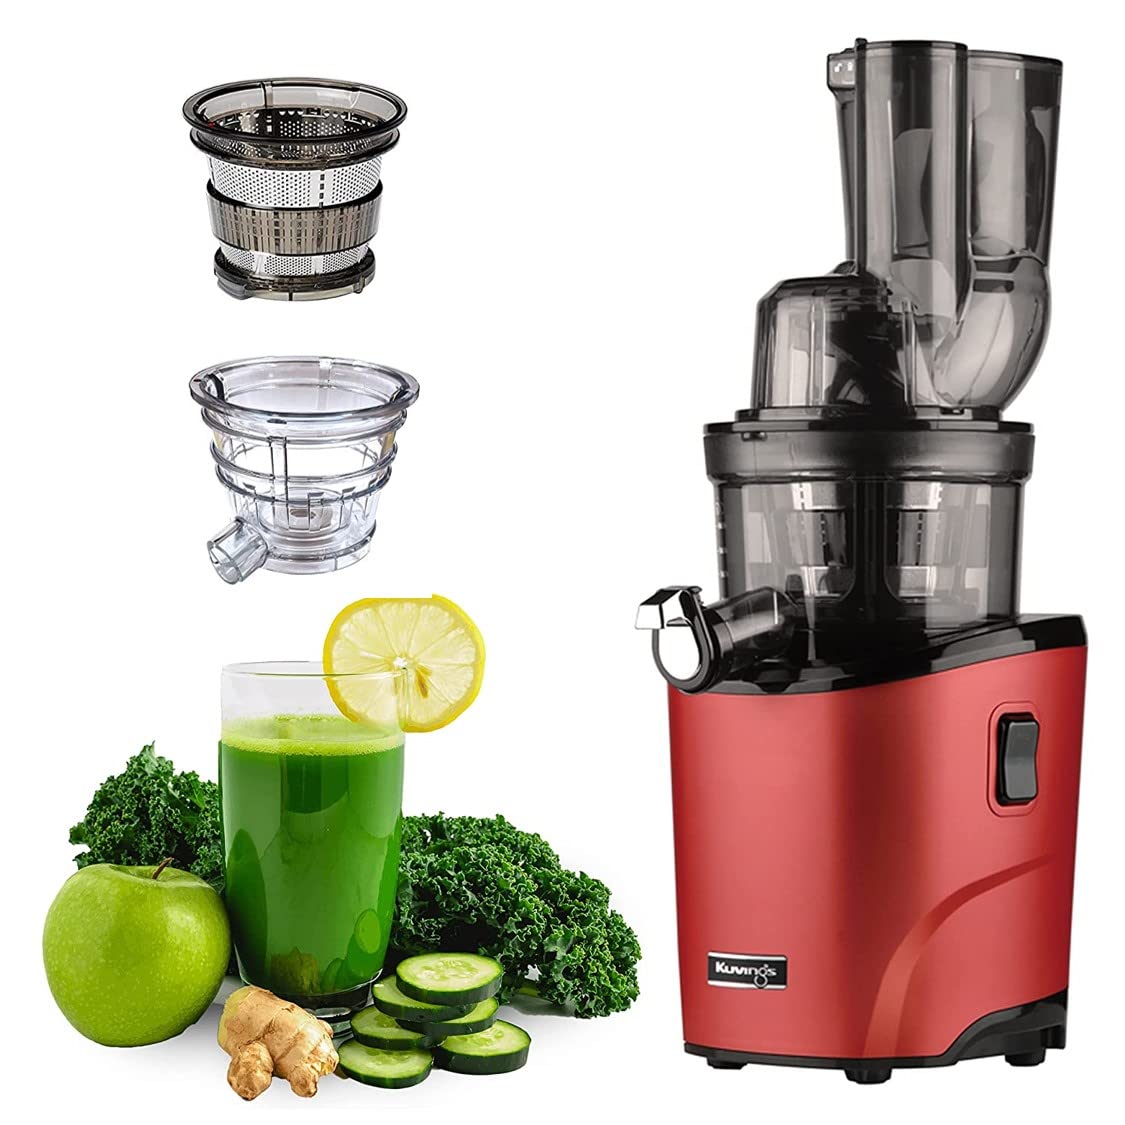 Kuvings REVO Series Professional Cold Press Whole Slow Juicer, World's First Juicer with Patented Automatic-Cutting Auger to reduce juicing time (REVO830 Red + Smoothie & Sorbet)